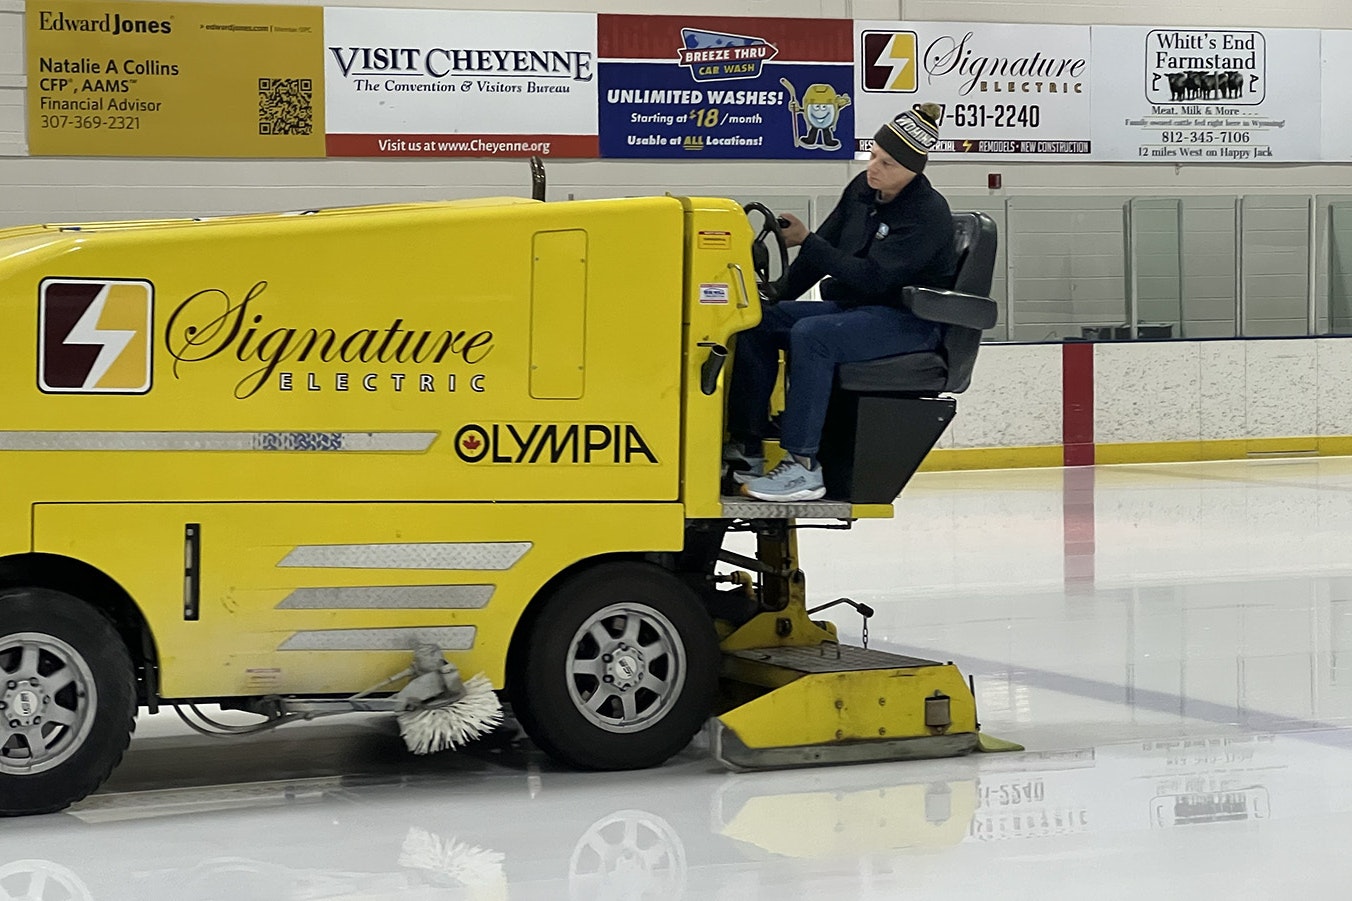 Cheyenne's Jeff Gillotti drives a Zamboni over the ice surface at the Cheyenne Ice and Events Center.